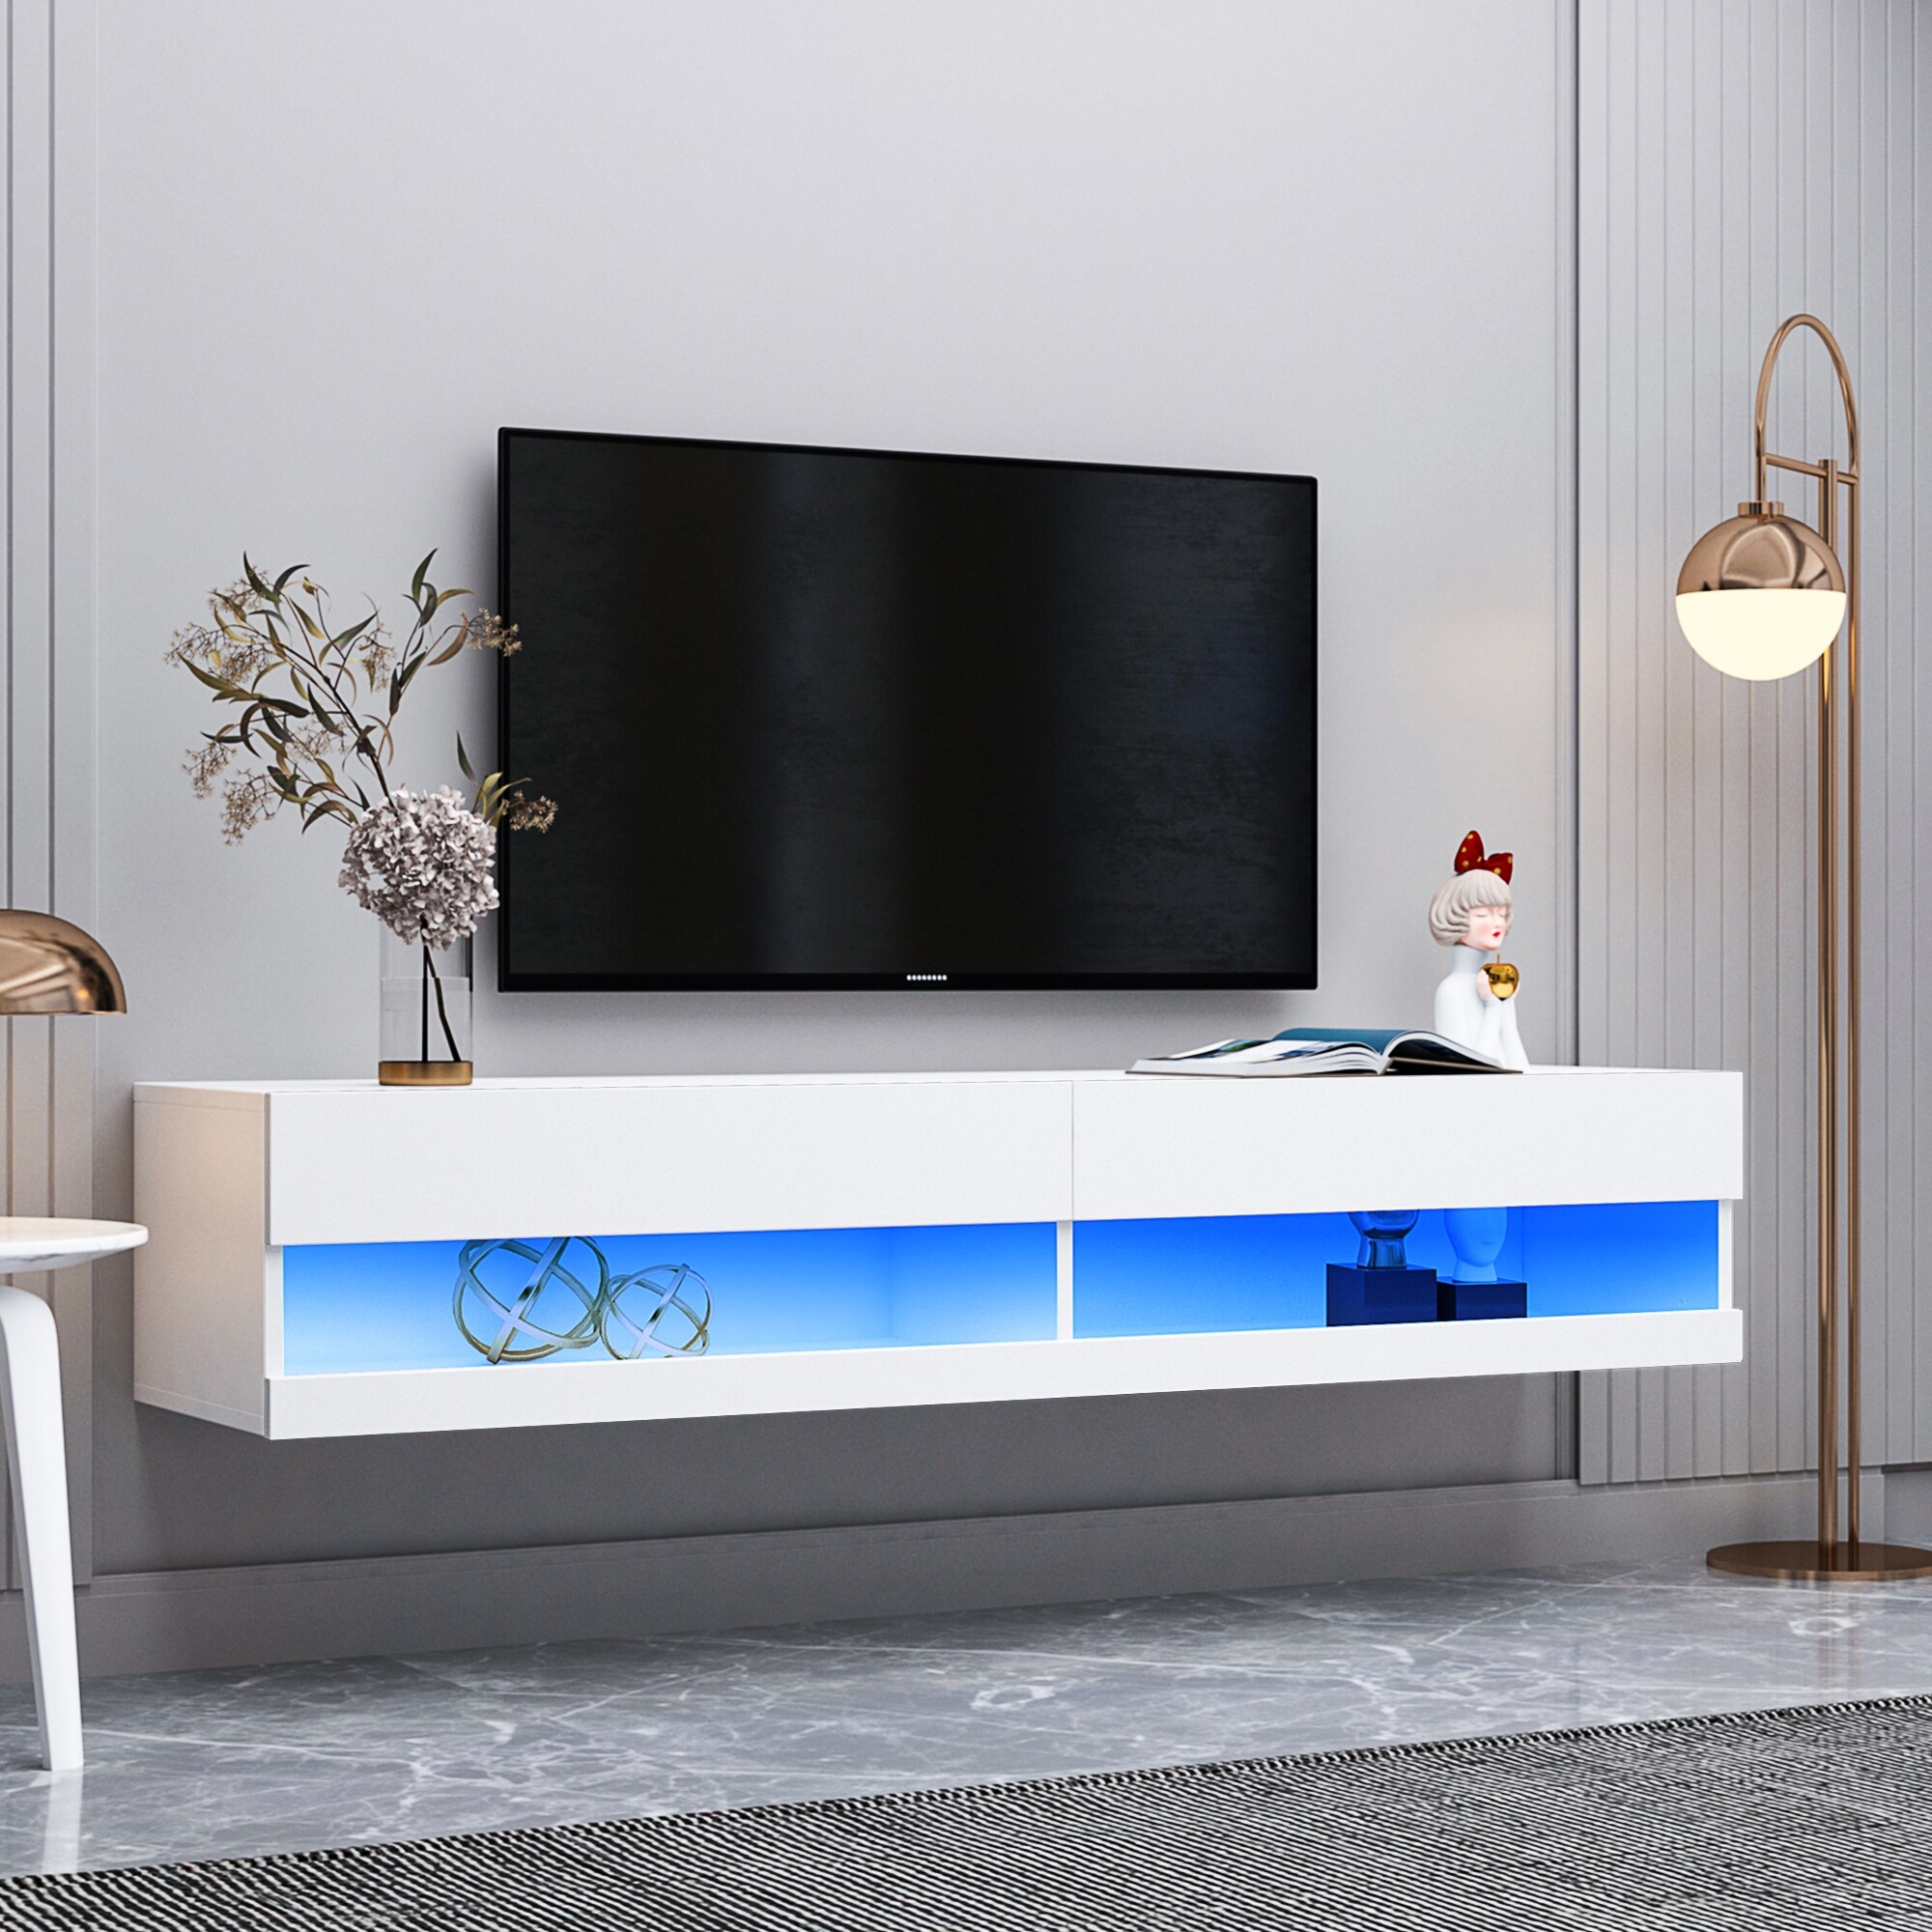 80 Tv Stand 180 Wall Mounted Cabinet  Floating Media Consoles Hanging Tv Console Entertainment Center With 20 Color Leds